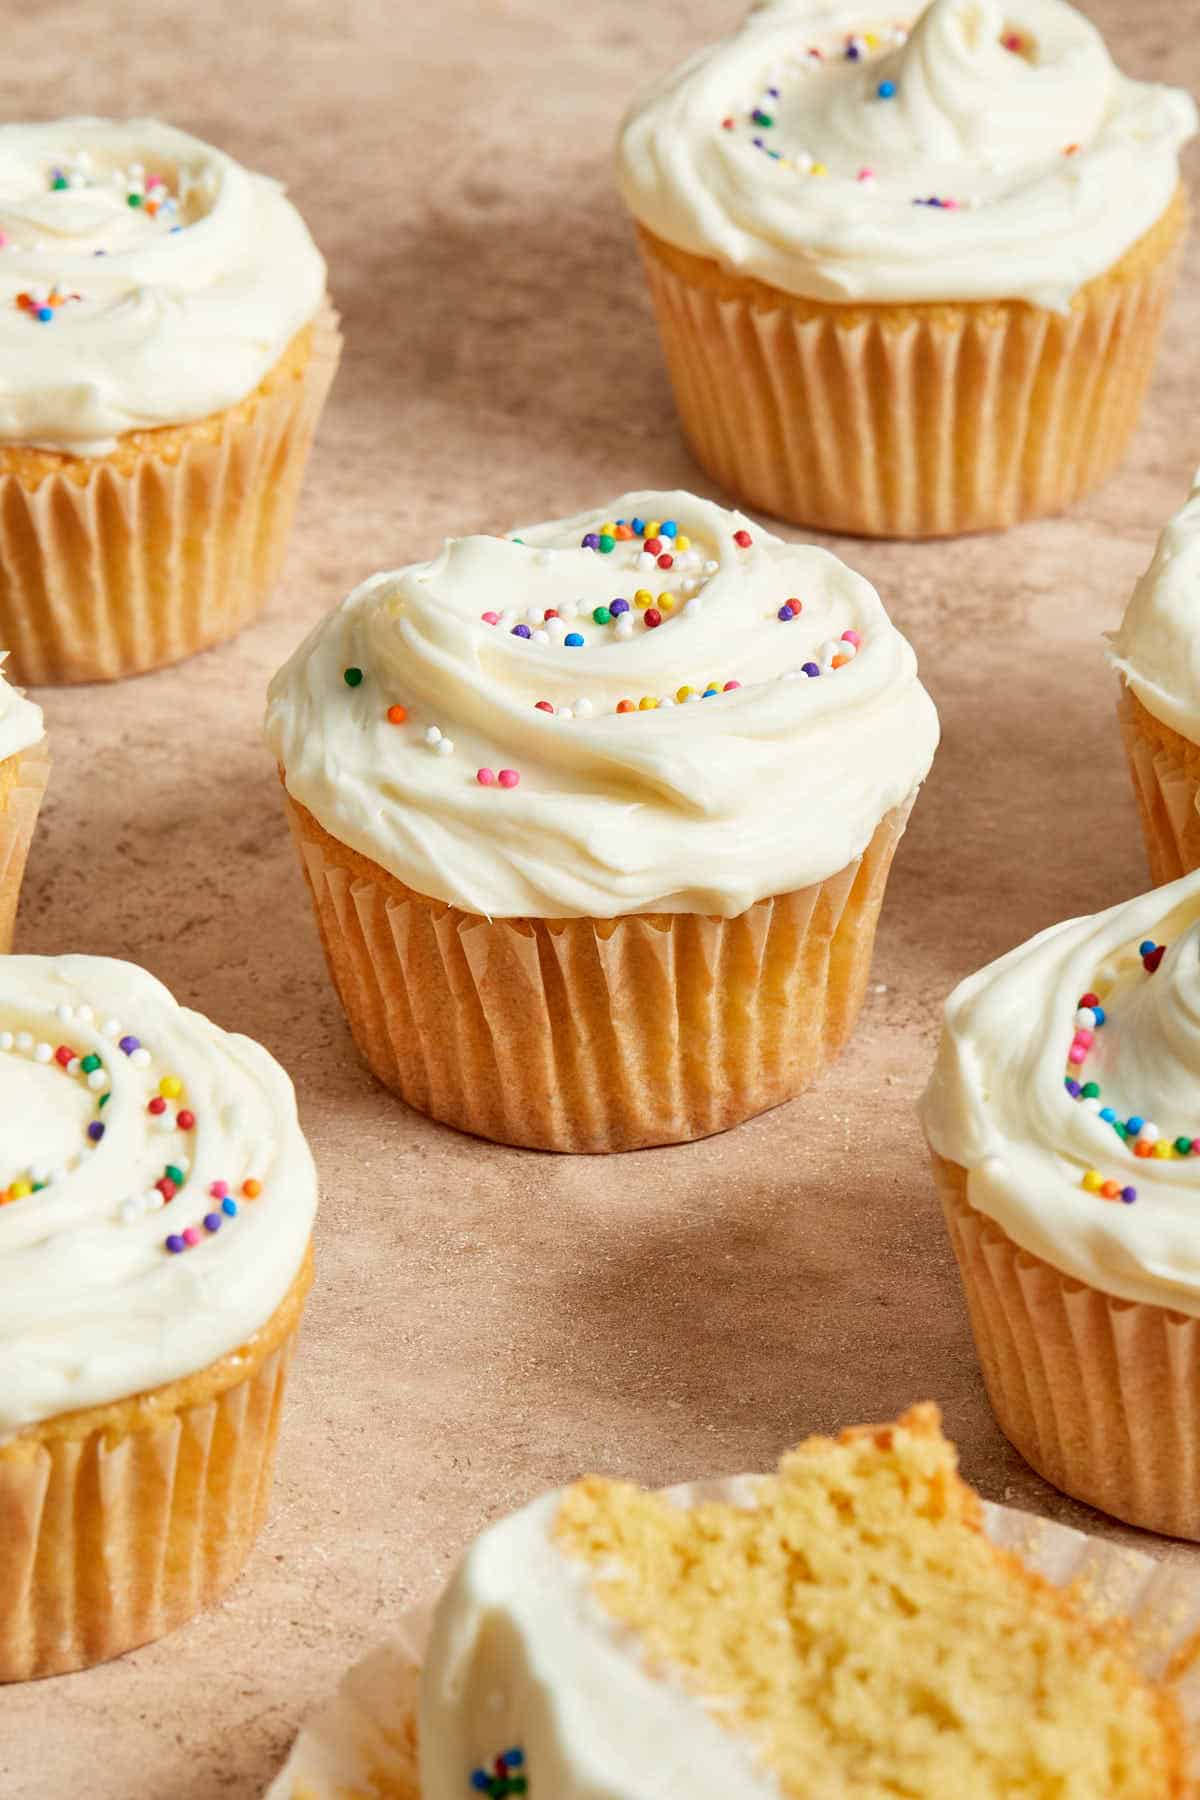 Three-quarter view of almond flour cupcakes arranged on a surface.